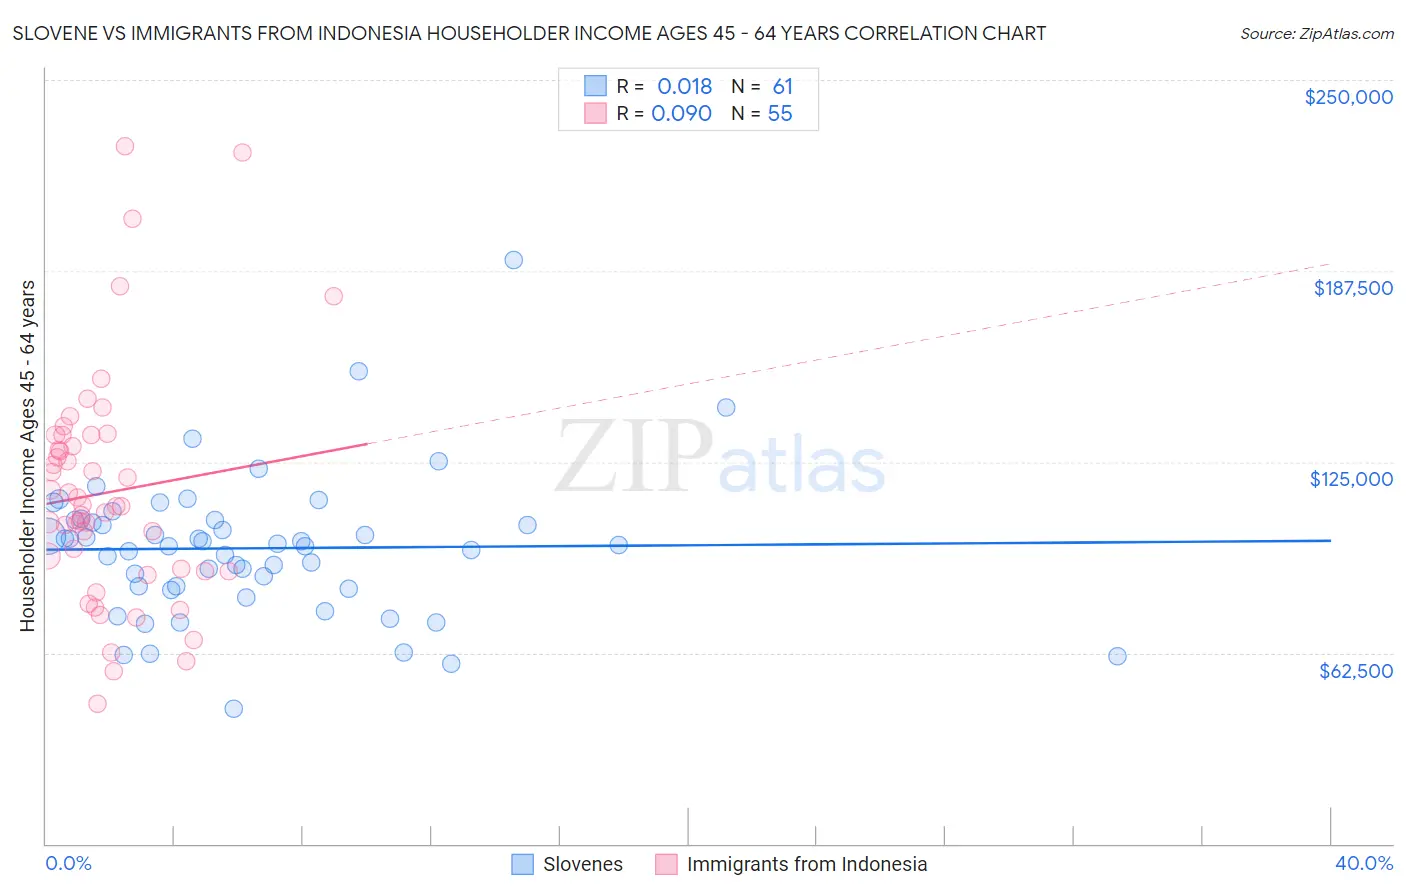 Slovene vs Immigrants from Indonesia Householder Income Ages 45 - 64 years